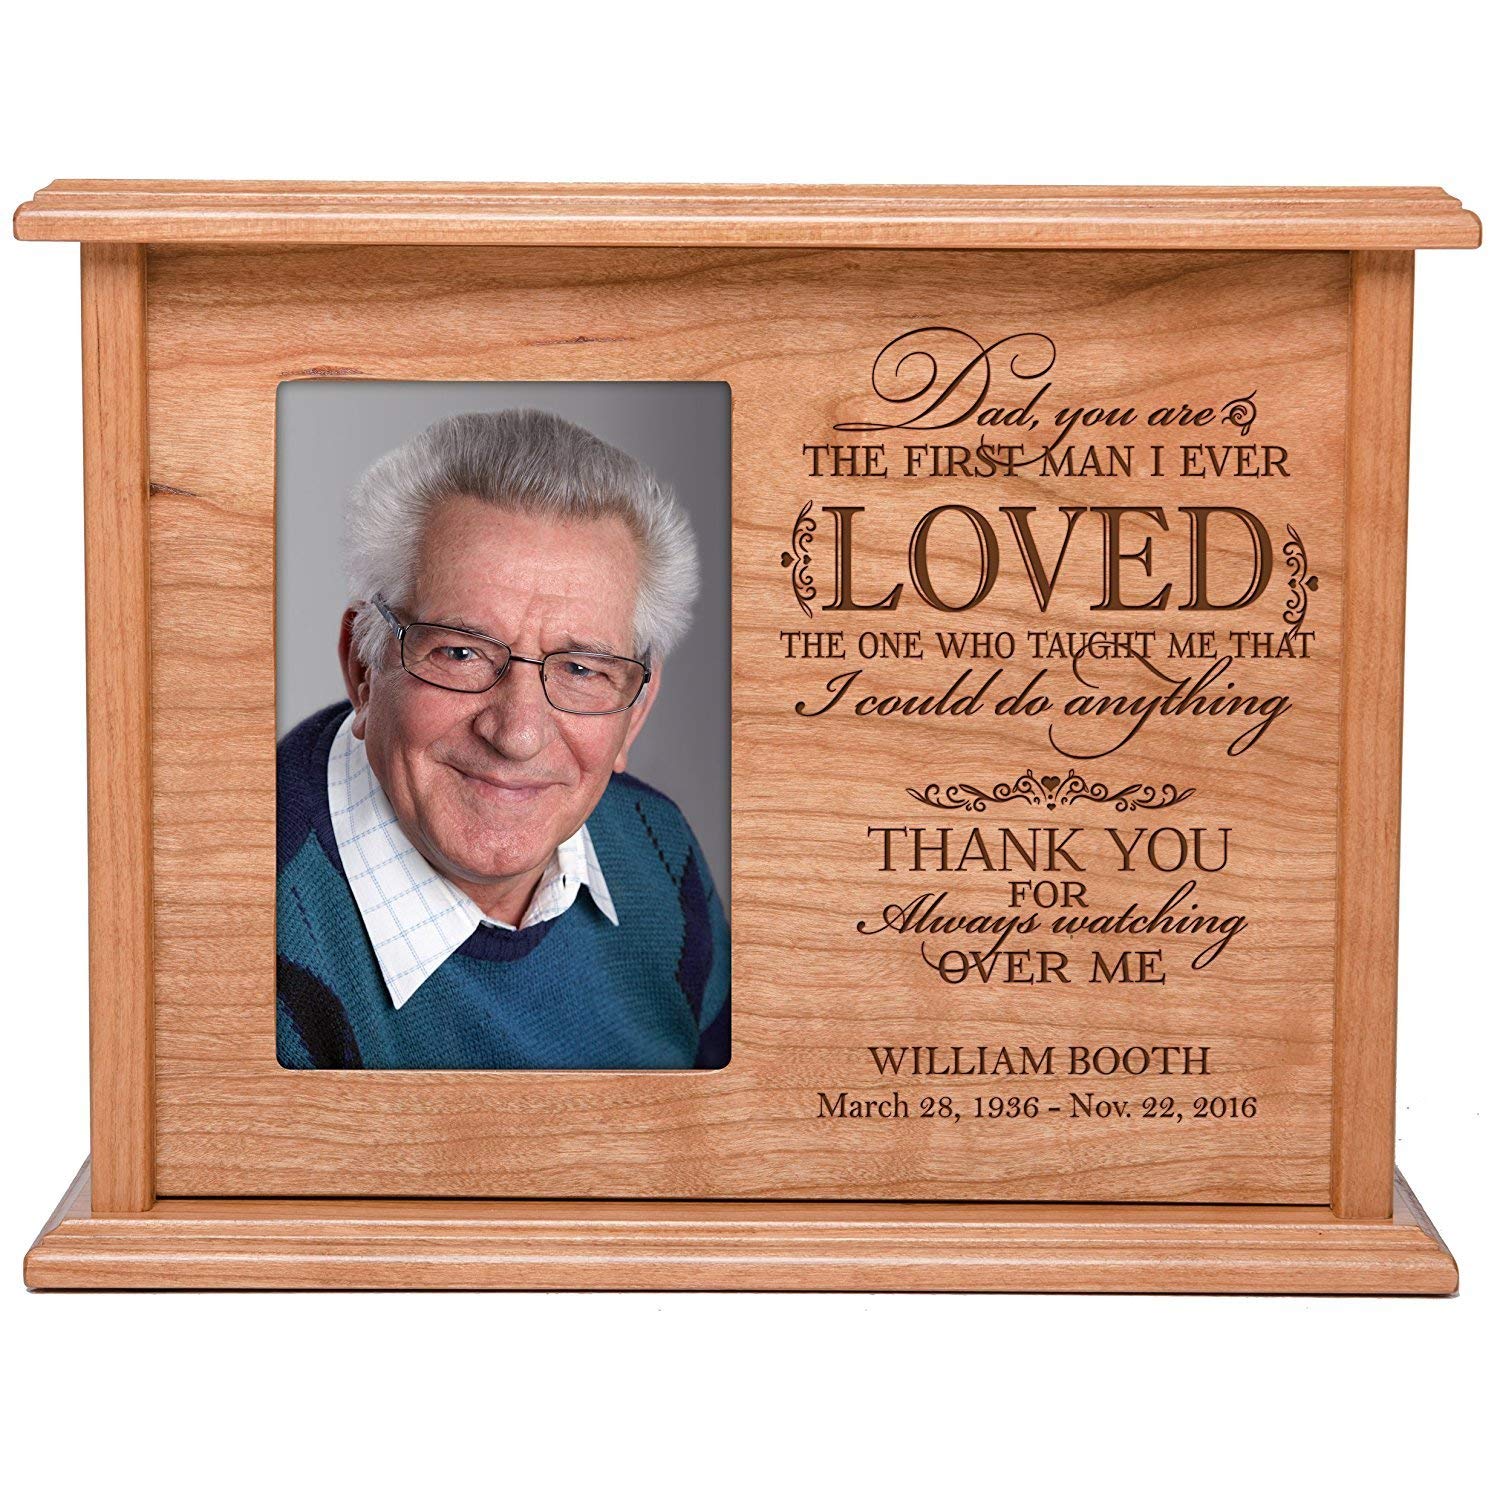 Custom Engraved Cherry Wood Cremation Urn Box with 4x6 Photo holds 200 cu in of Human Ashes Dad, You Are - LifeSong Milestones